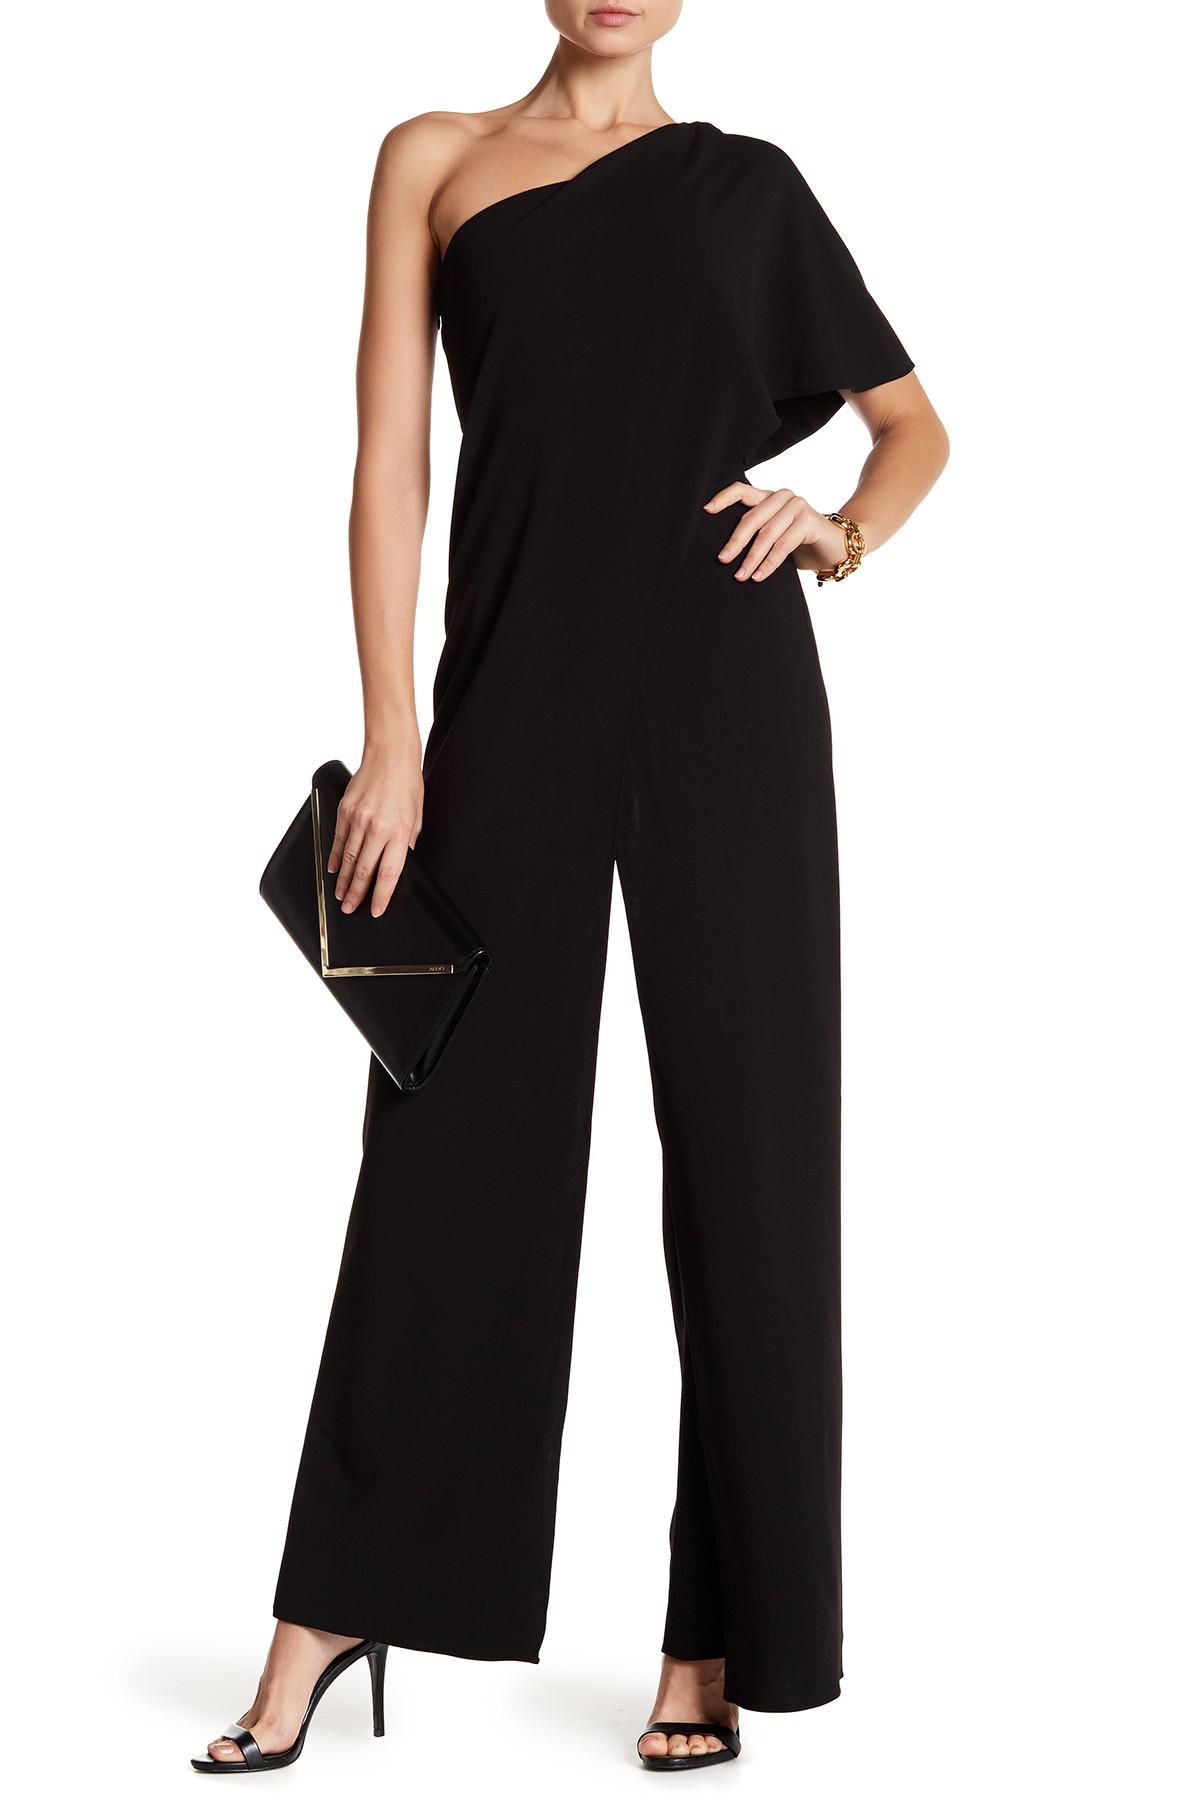 Alexia Admor Synthetic One Shoulder Ruffle Sleeve Jumpsuit in Black - Lyst